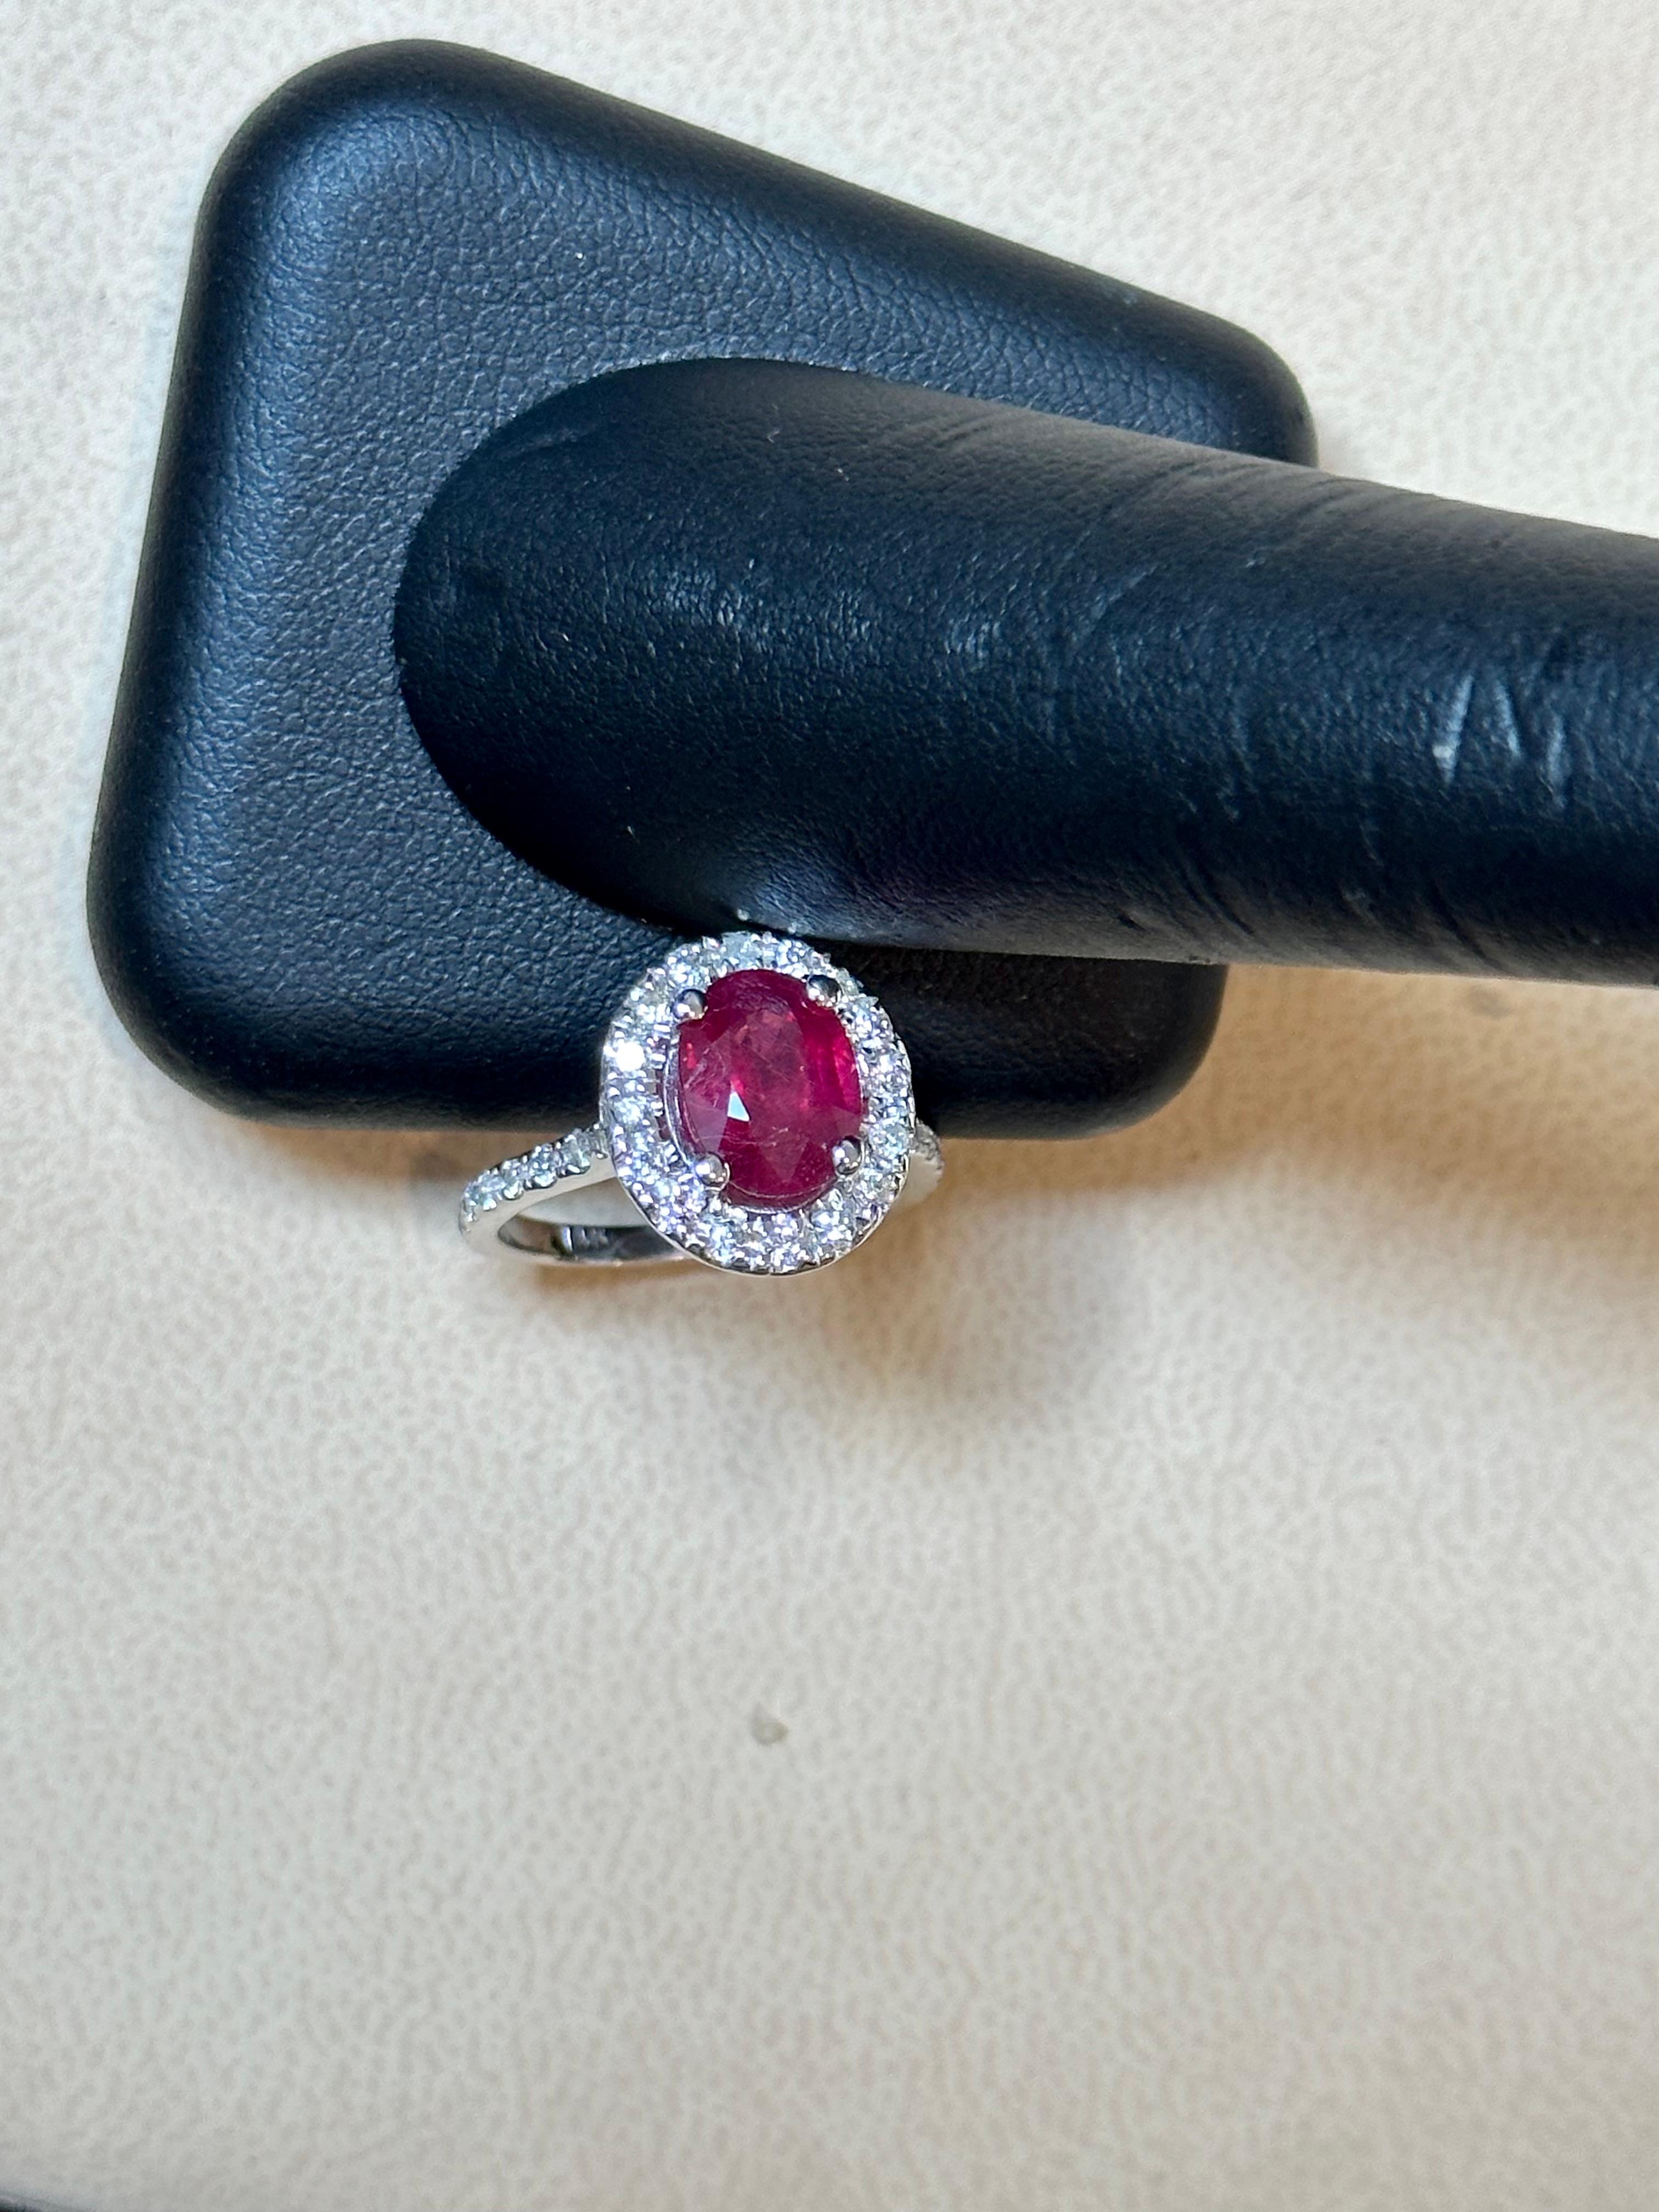 3 Carat Oval Treated Ruby & 1.25 ct Diamond Ring 14 Karat White Gold Size 6 For Sale 3